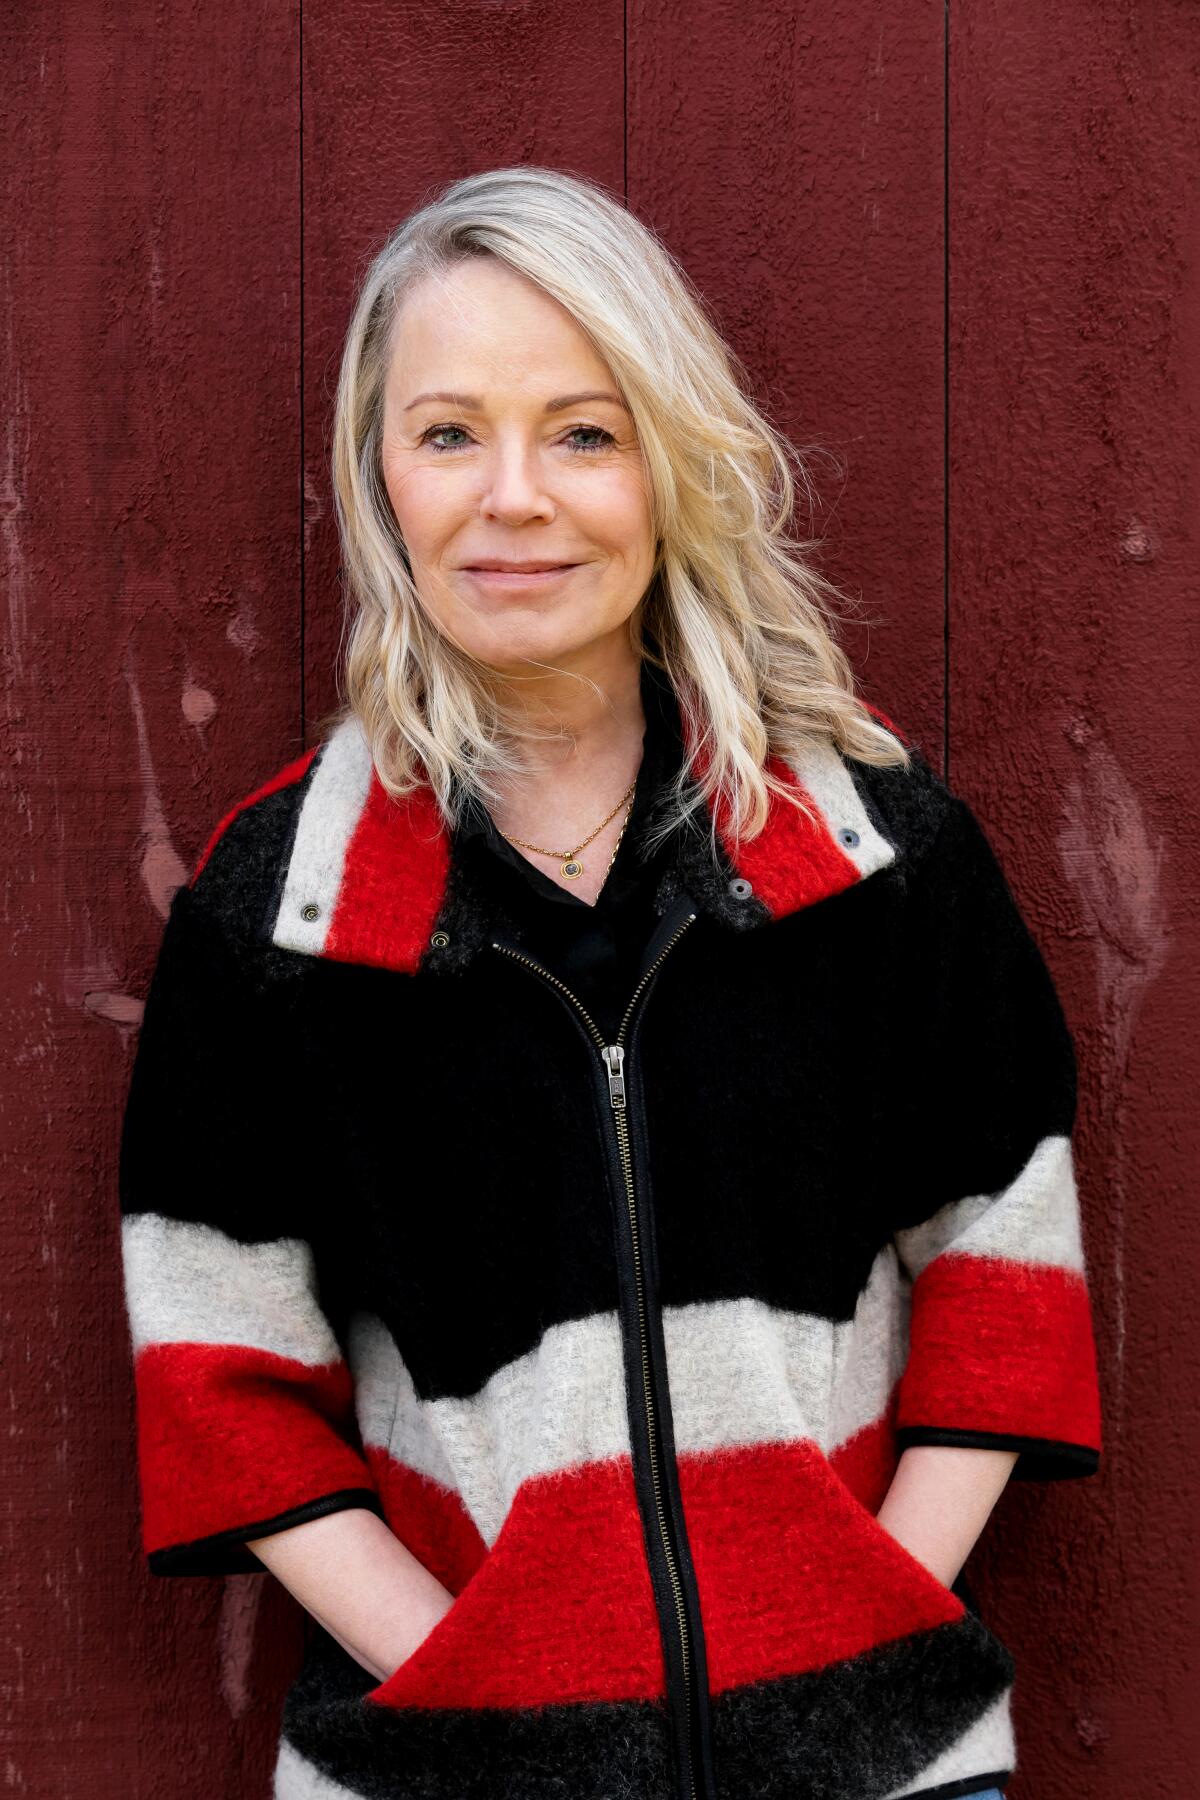 A woman with blonde hair wears a dark fleece jacket with wide red and white stripes.